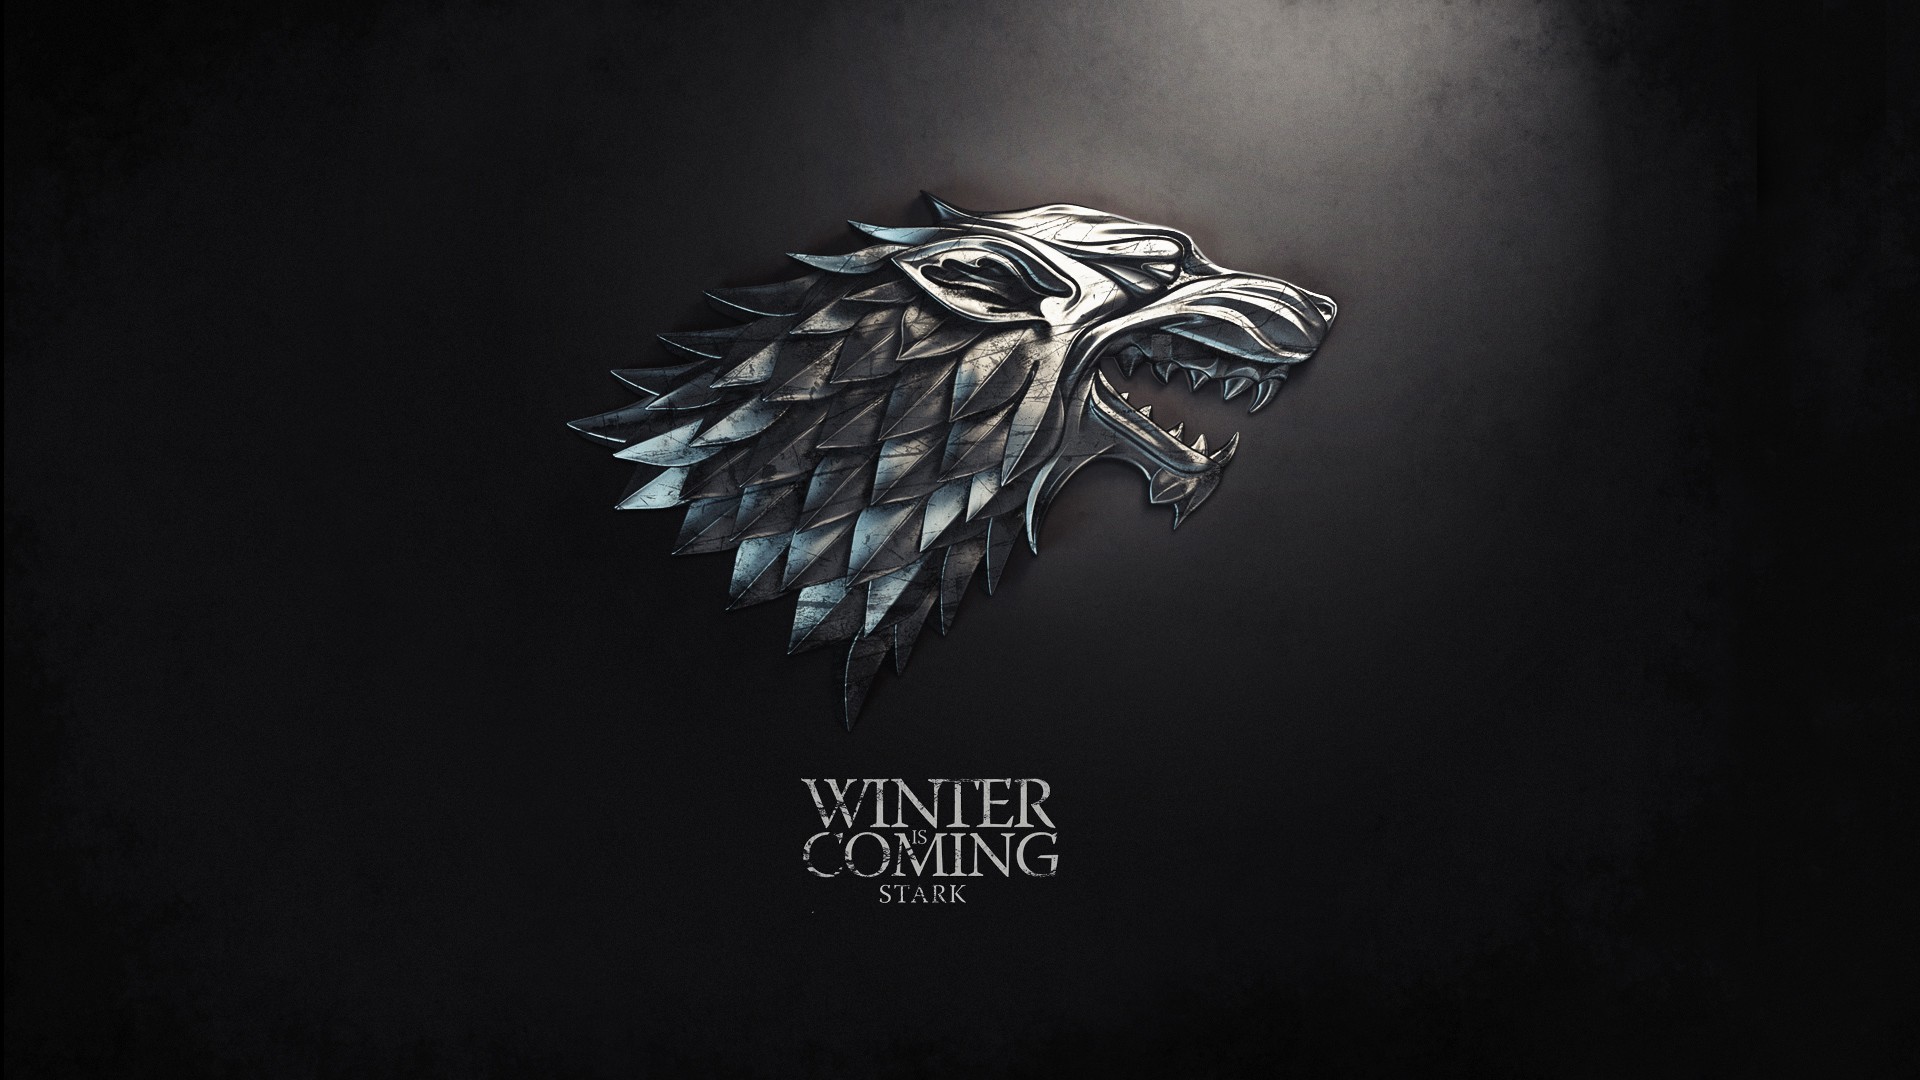 1920x1080 Game of Thrones wallpaper A song of Ice and Fire House of Stark wolf symbol  logo